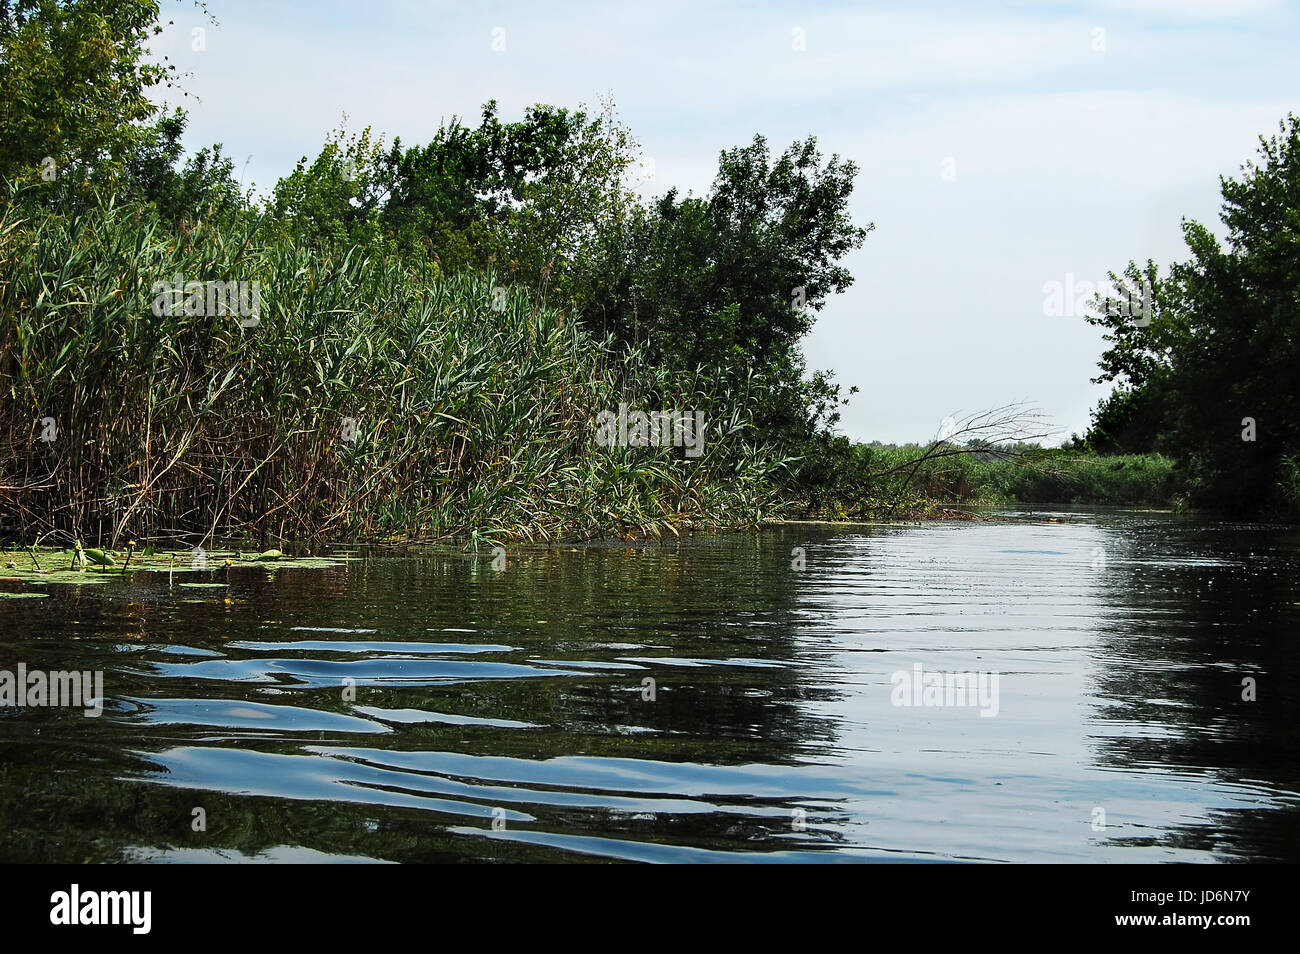 Summer floodplain river with jungles of reeds and trees. Summer water scape. Stock Photo